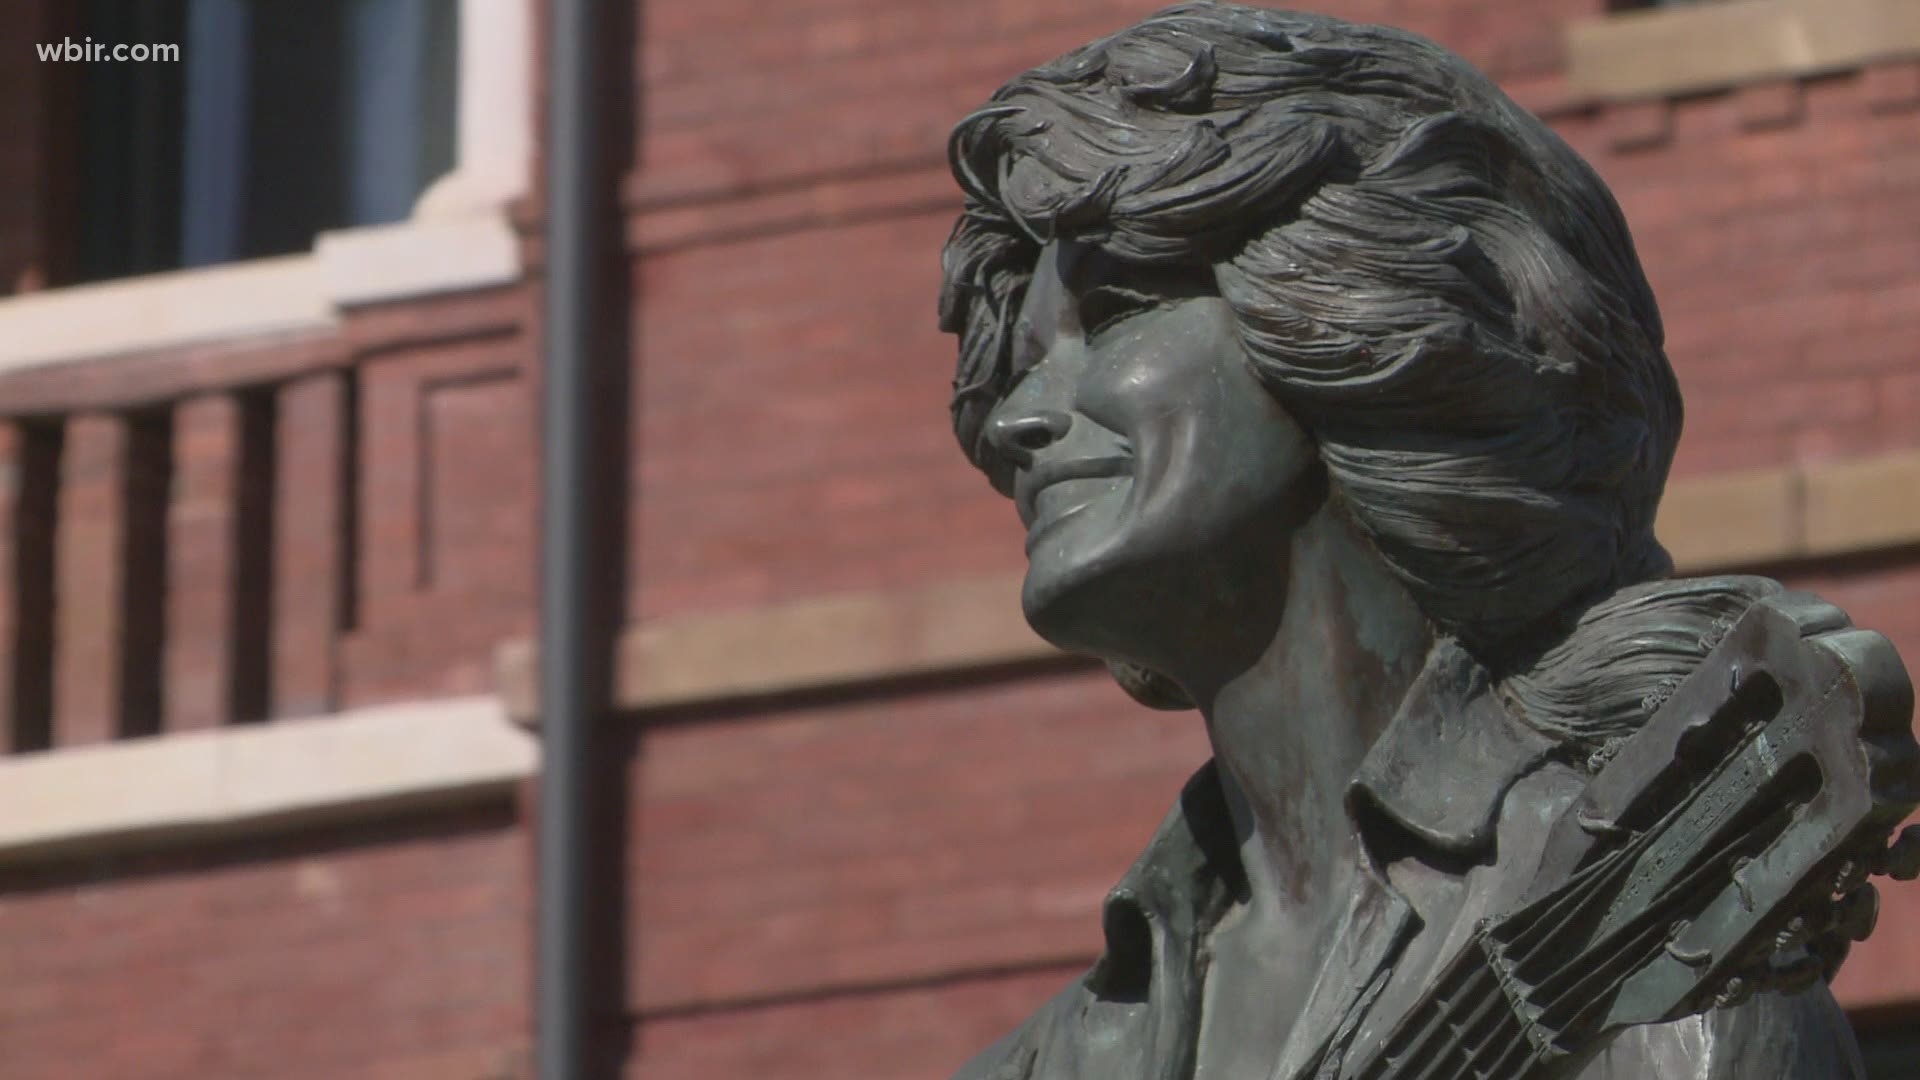 A new petition is circulating that's calling for all Tennessee confederate monuments to be replaced with statues of Dolly Parton.